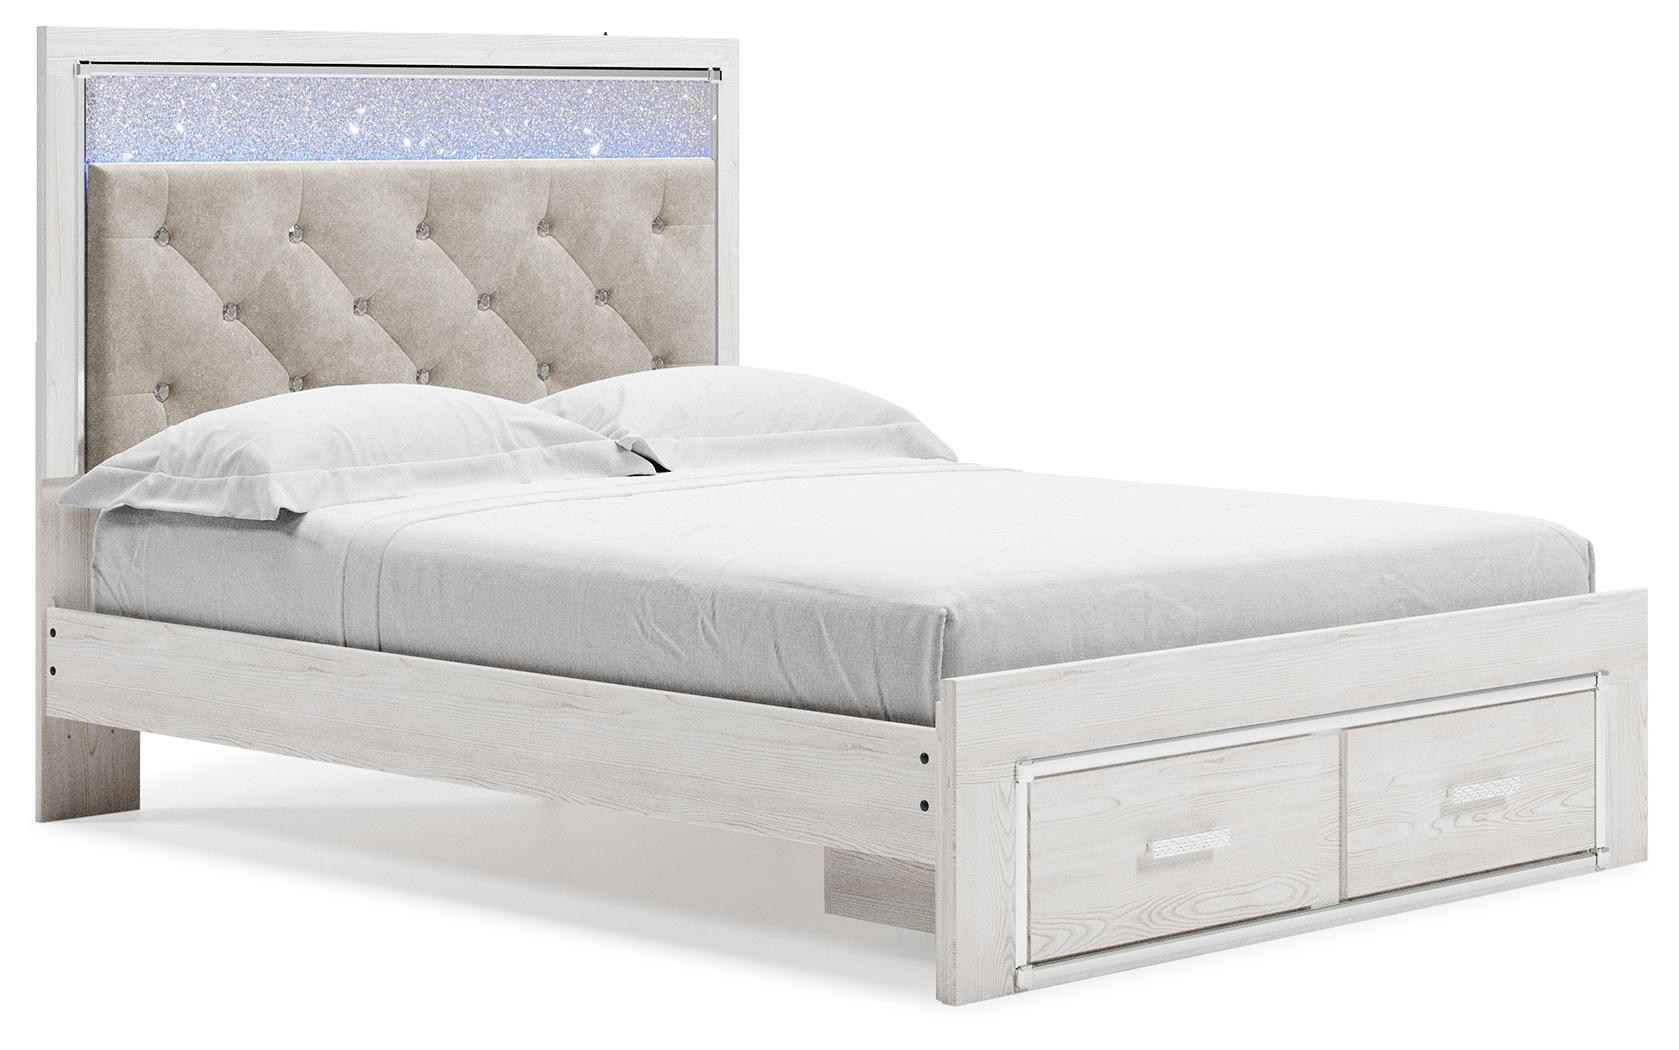 ASHLEY FURNITURE B2640B17 Altyra Queen Upholstered Storage Bed